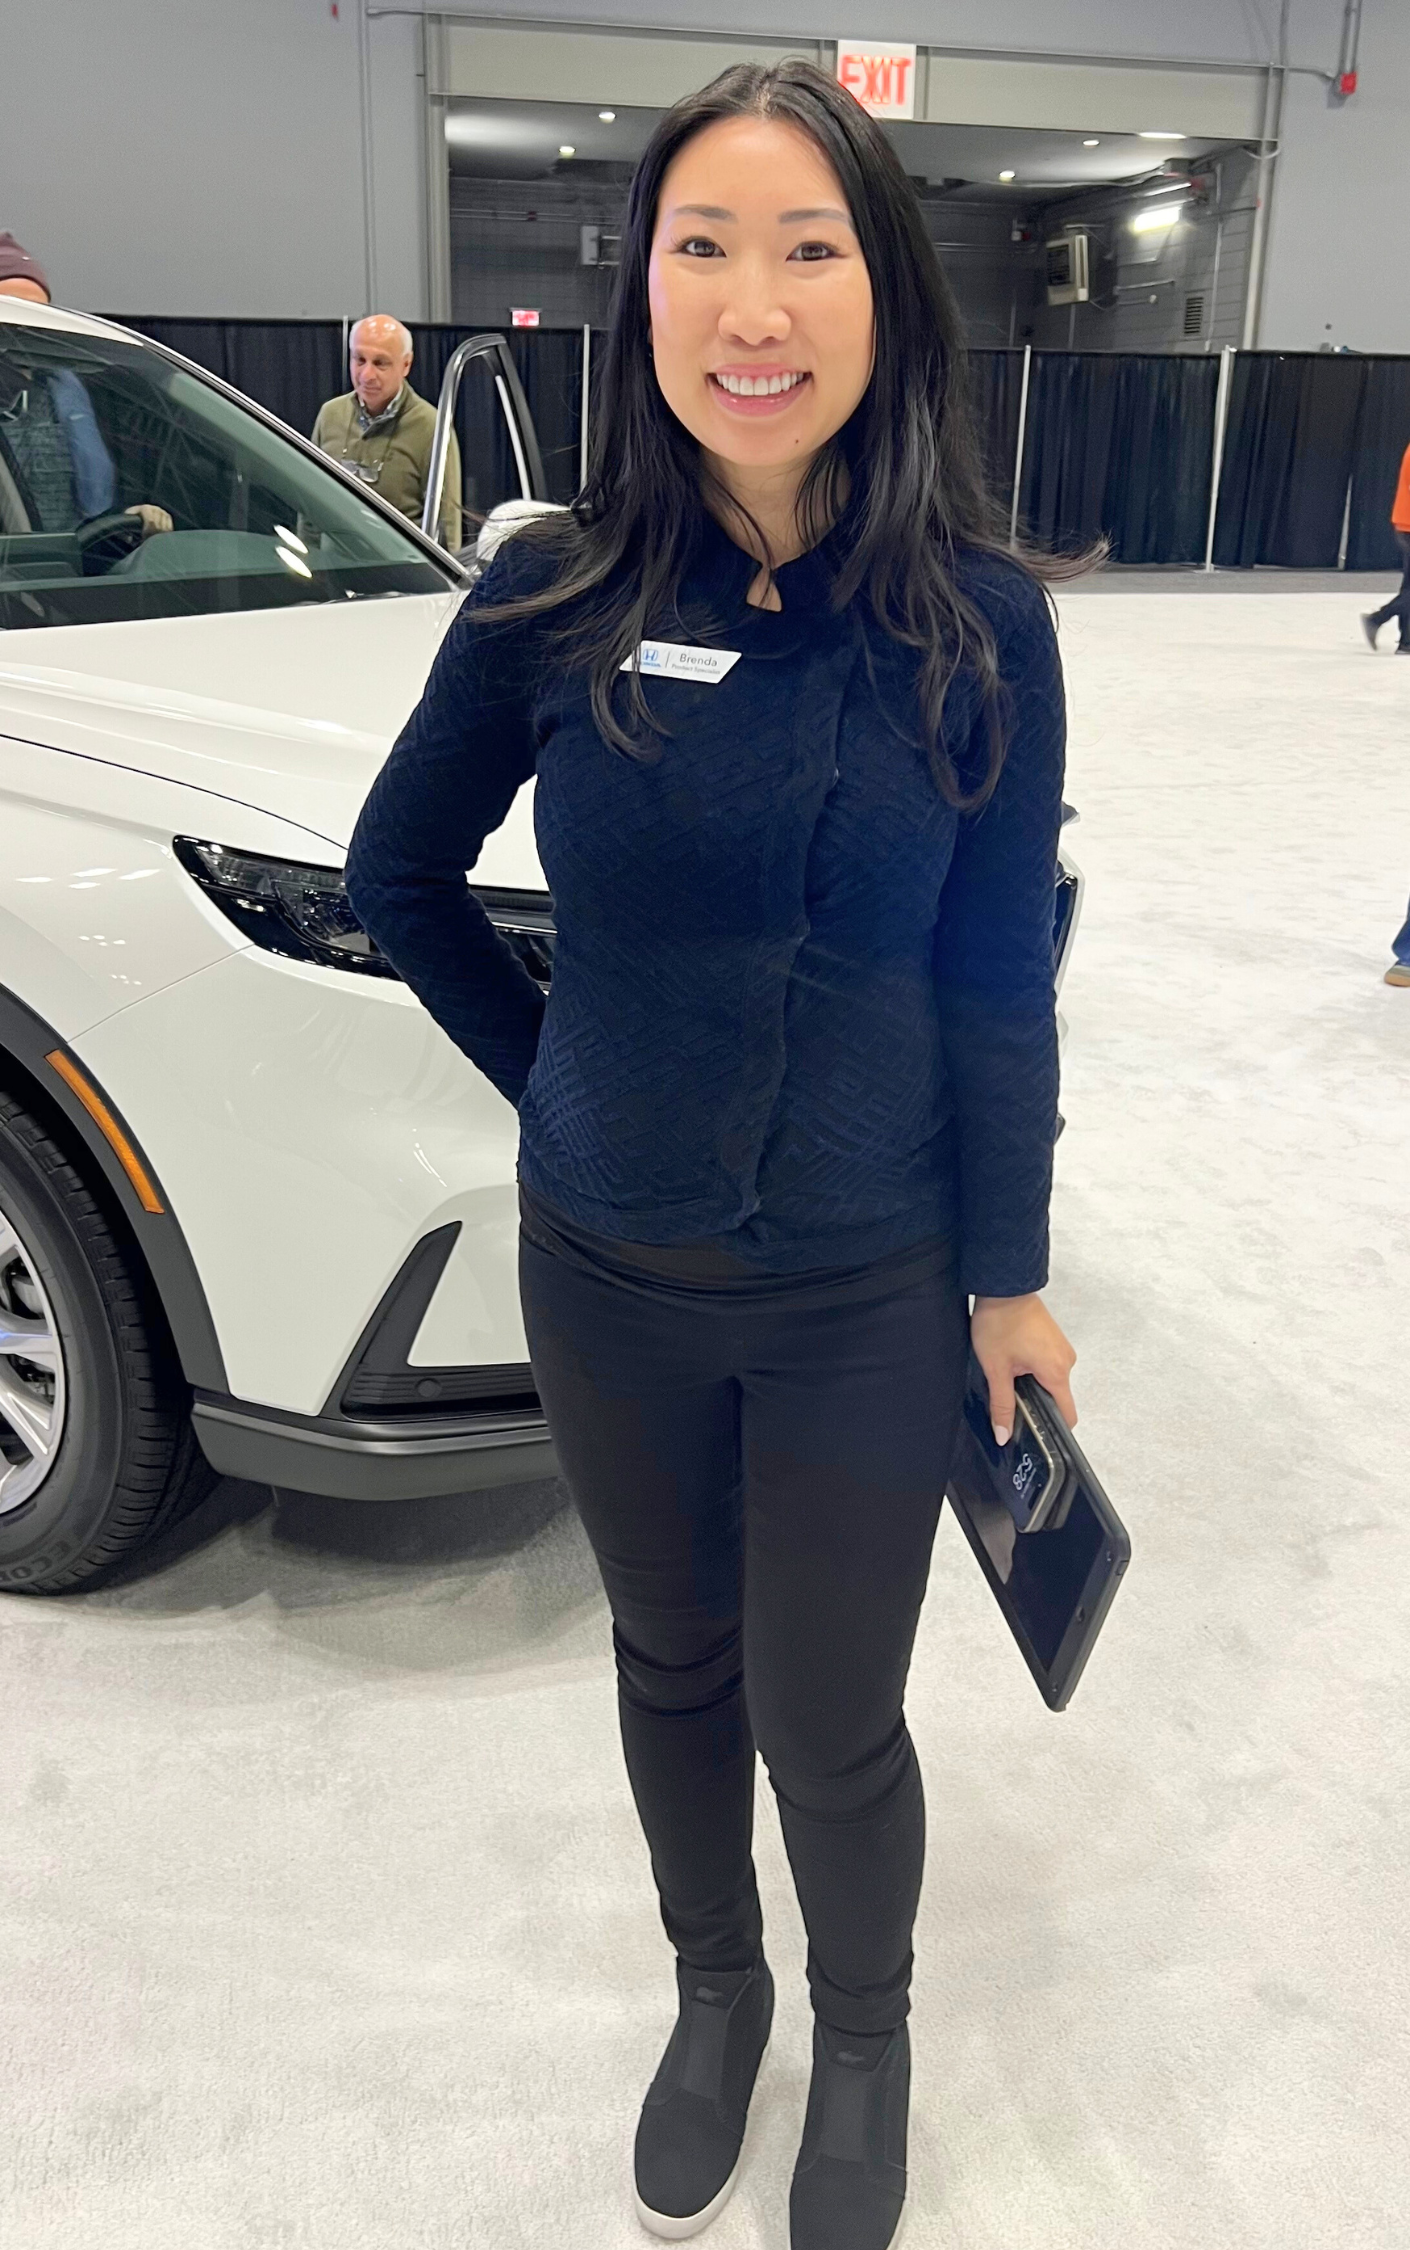 Honda Product Specialists At Car Shows Wear Armani And Ag Jeans 